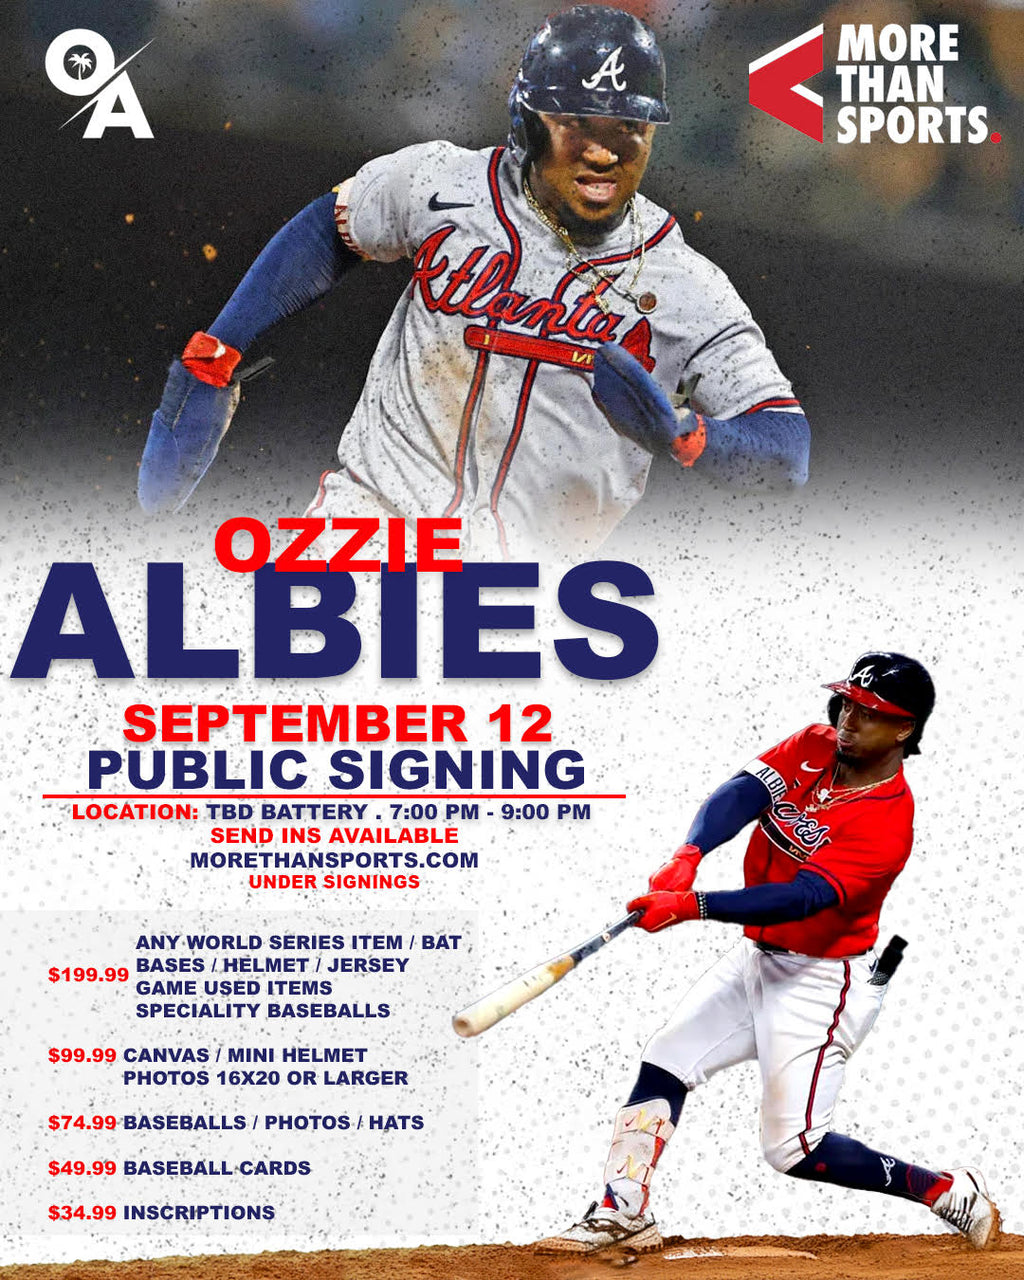 Ozzie Albies Public Signing Tickets for Purchase (Baseball Card)